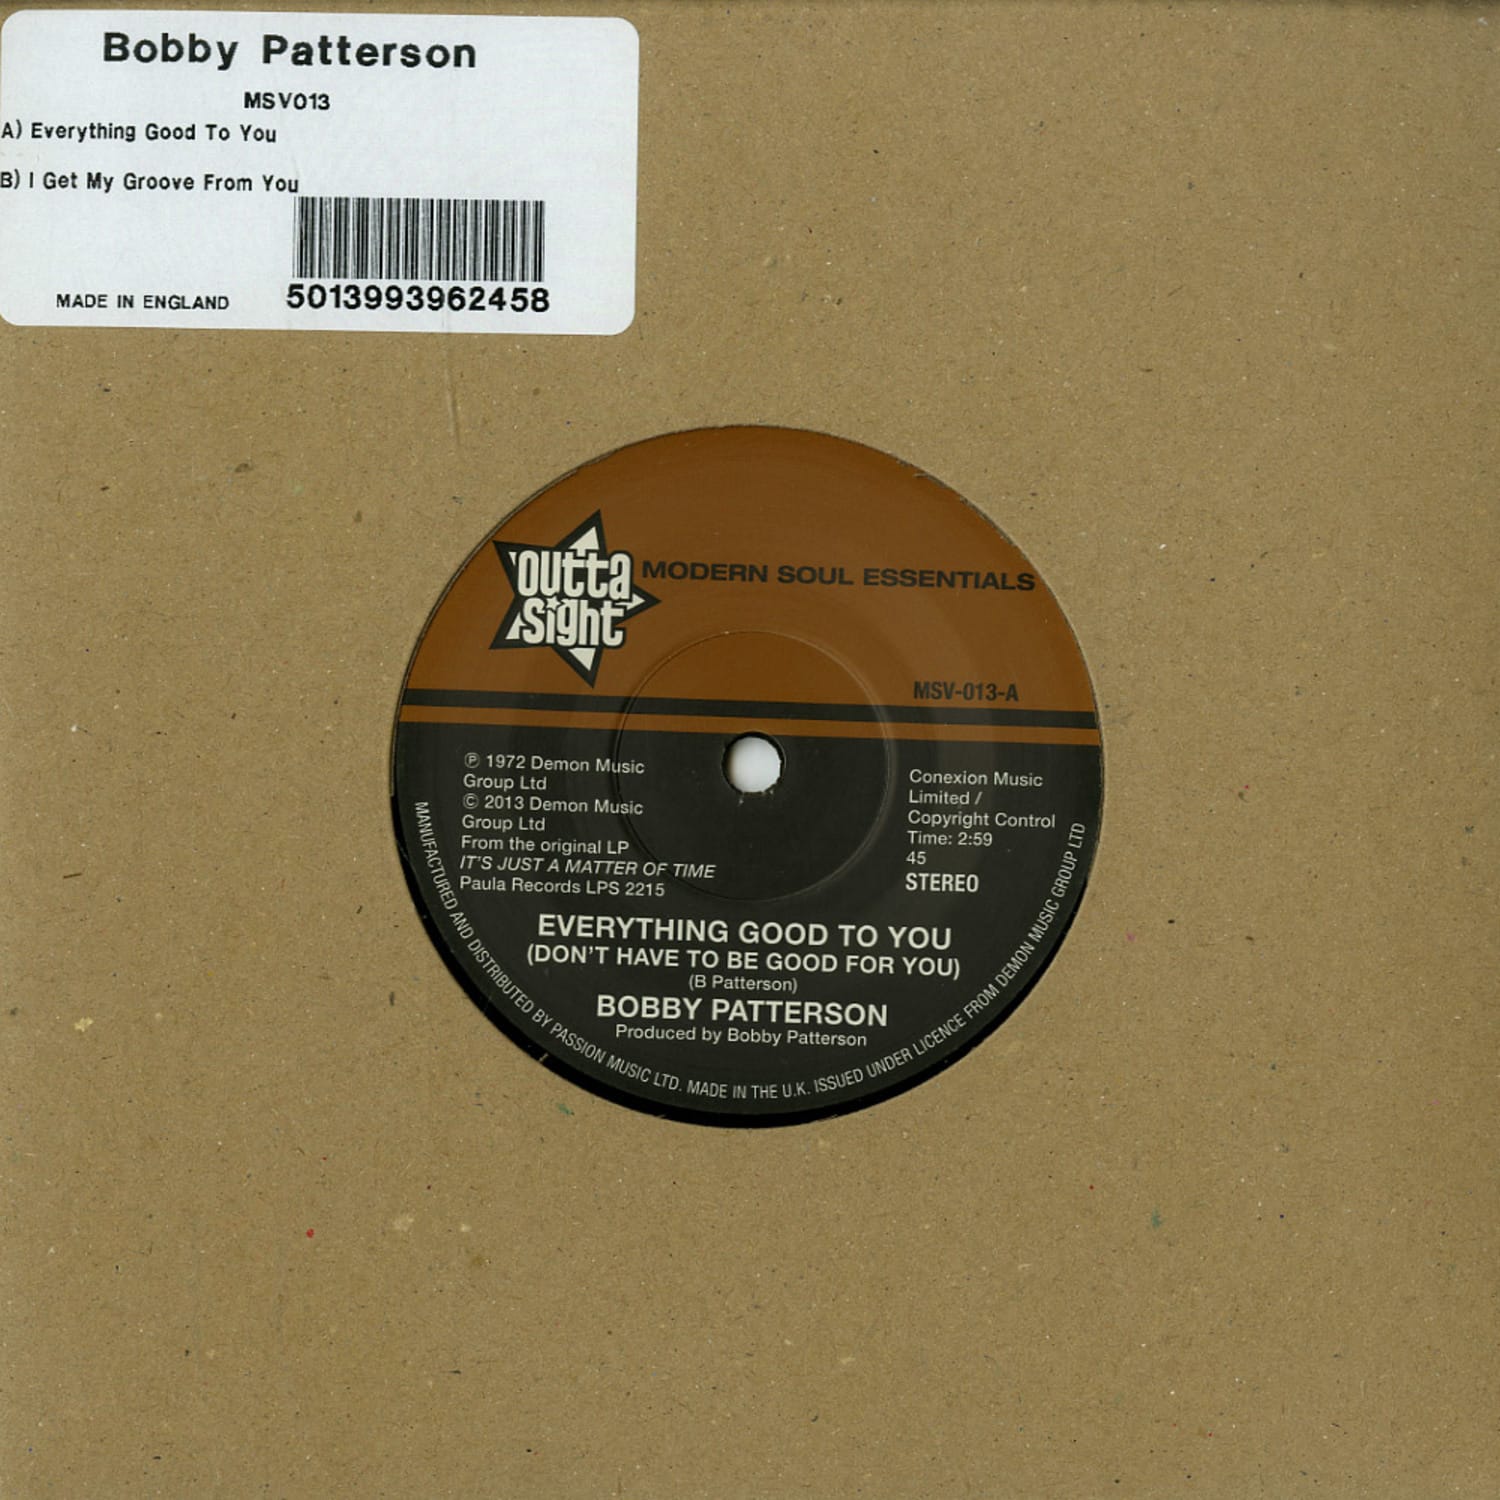 Bobby Patterson - EVERYTHING GOOD TO YOU 